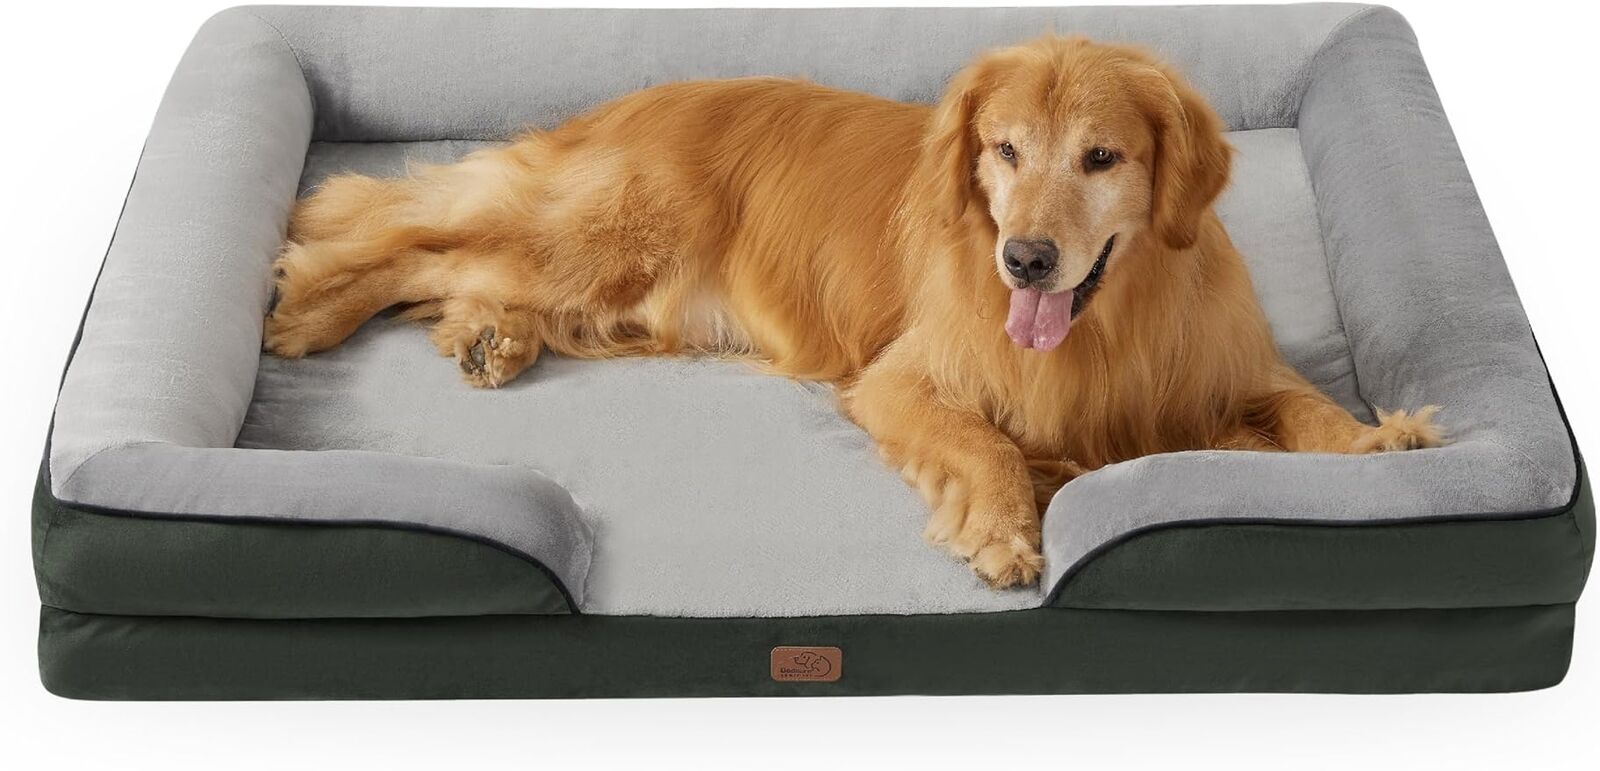 Washable Great Dane Dog Sofa Bed, Supportive Foam Pet Couch Bed